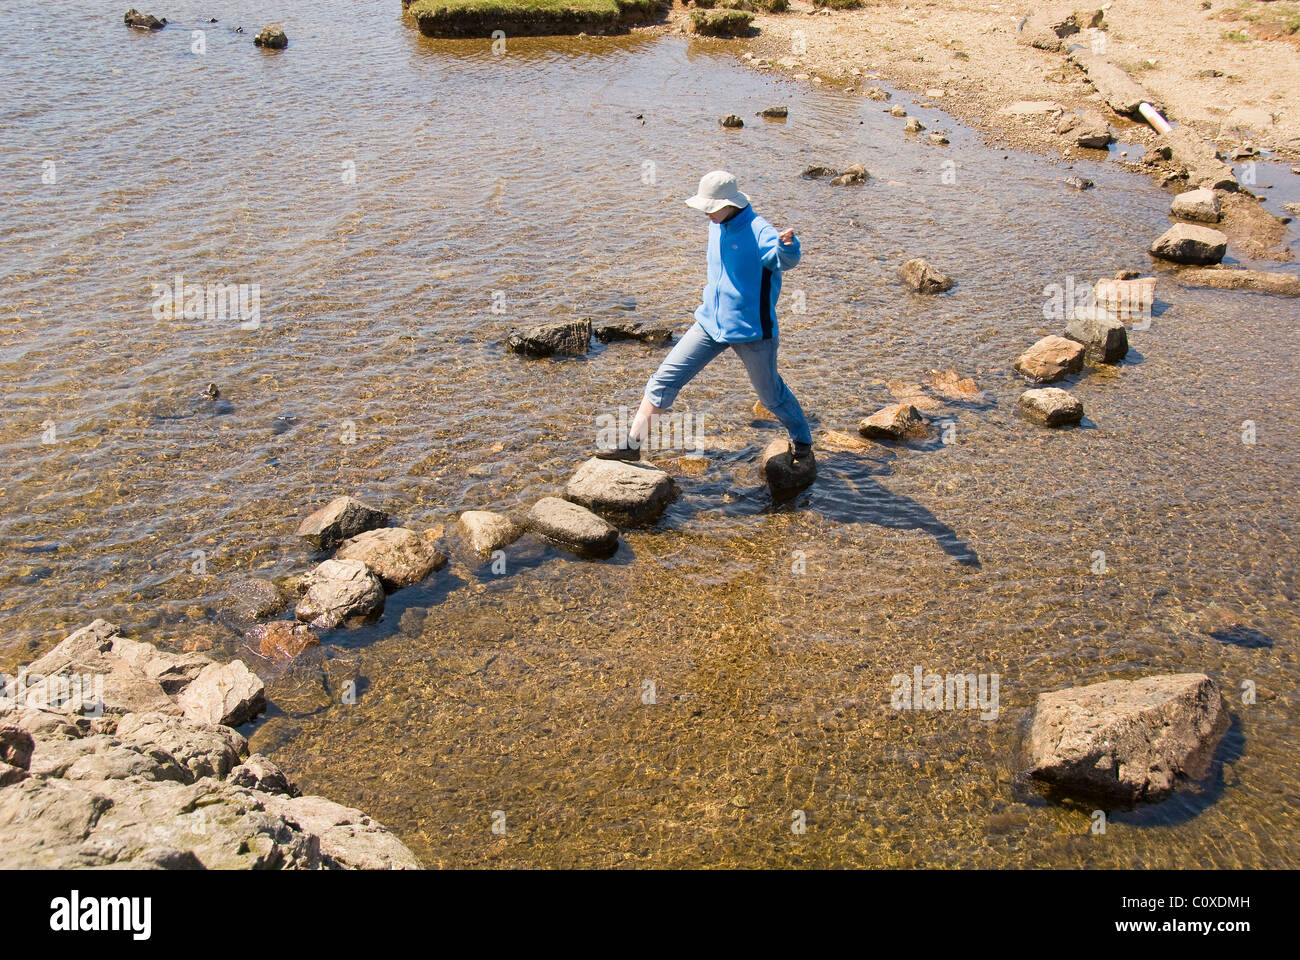 Woman using a river crossing, Lake District, England, UK Stock Photo